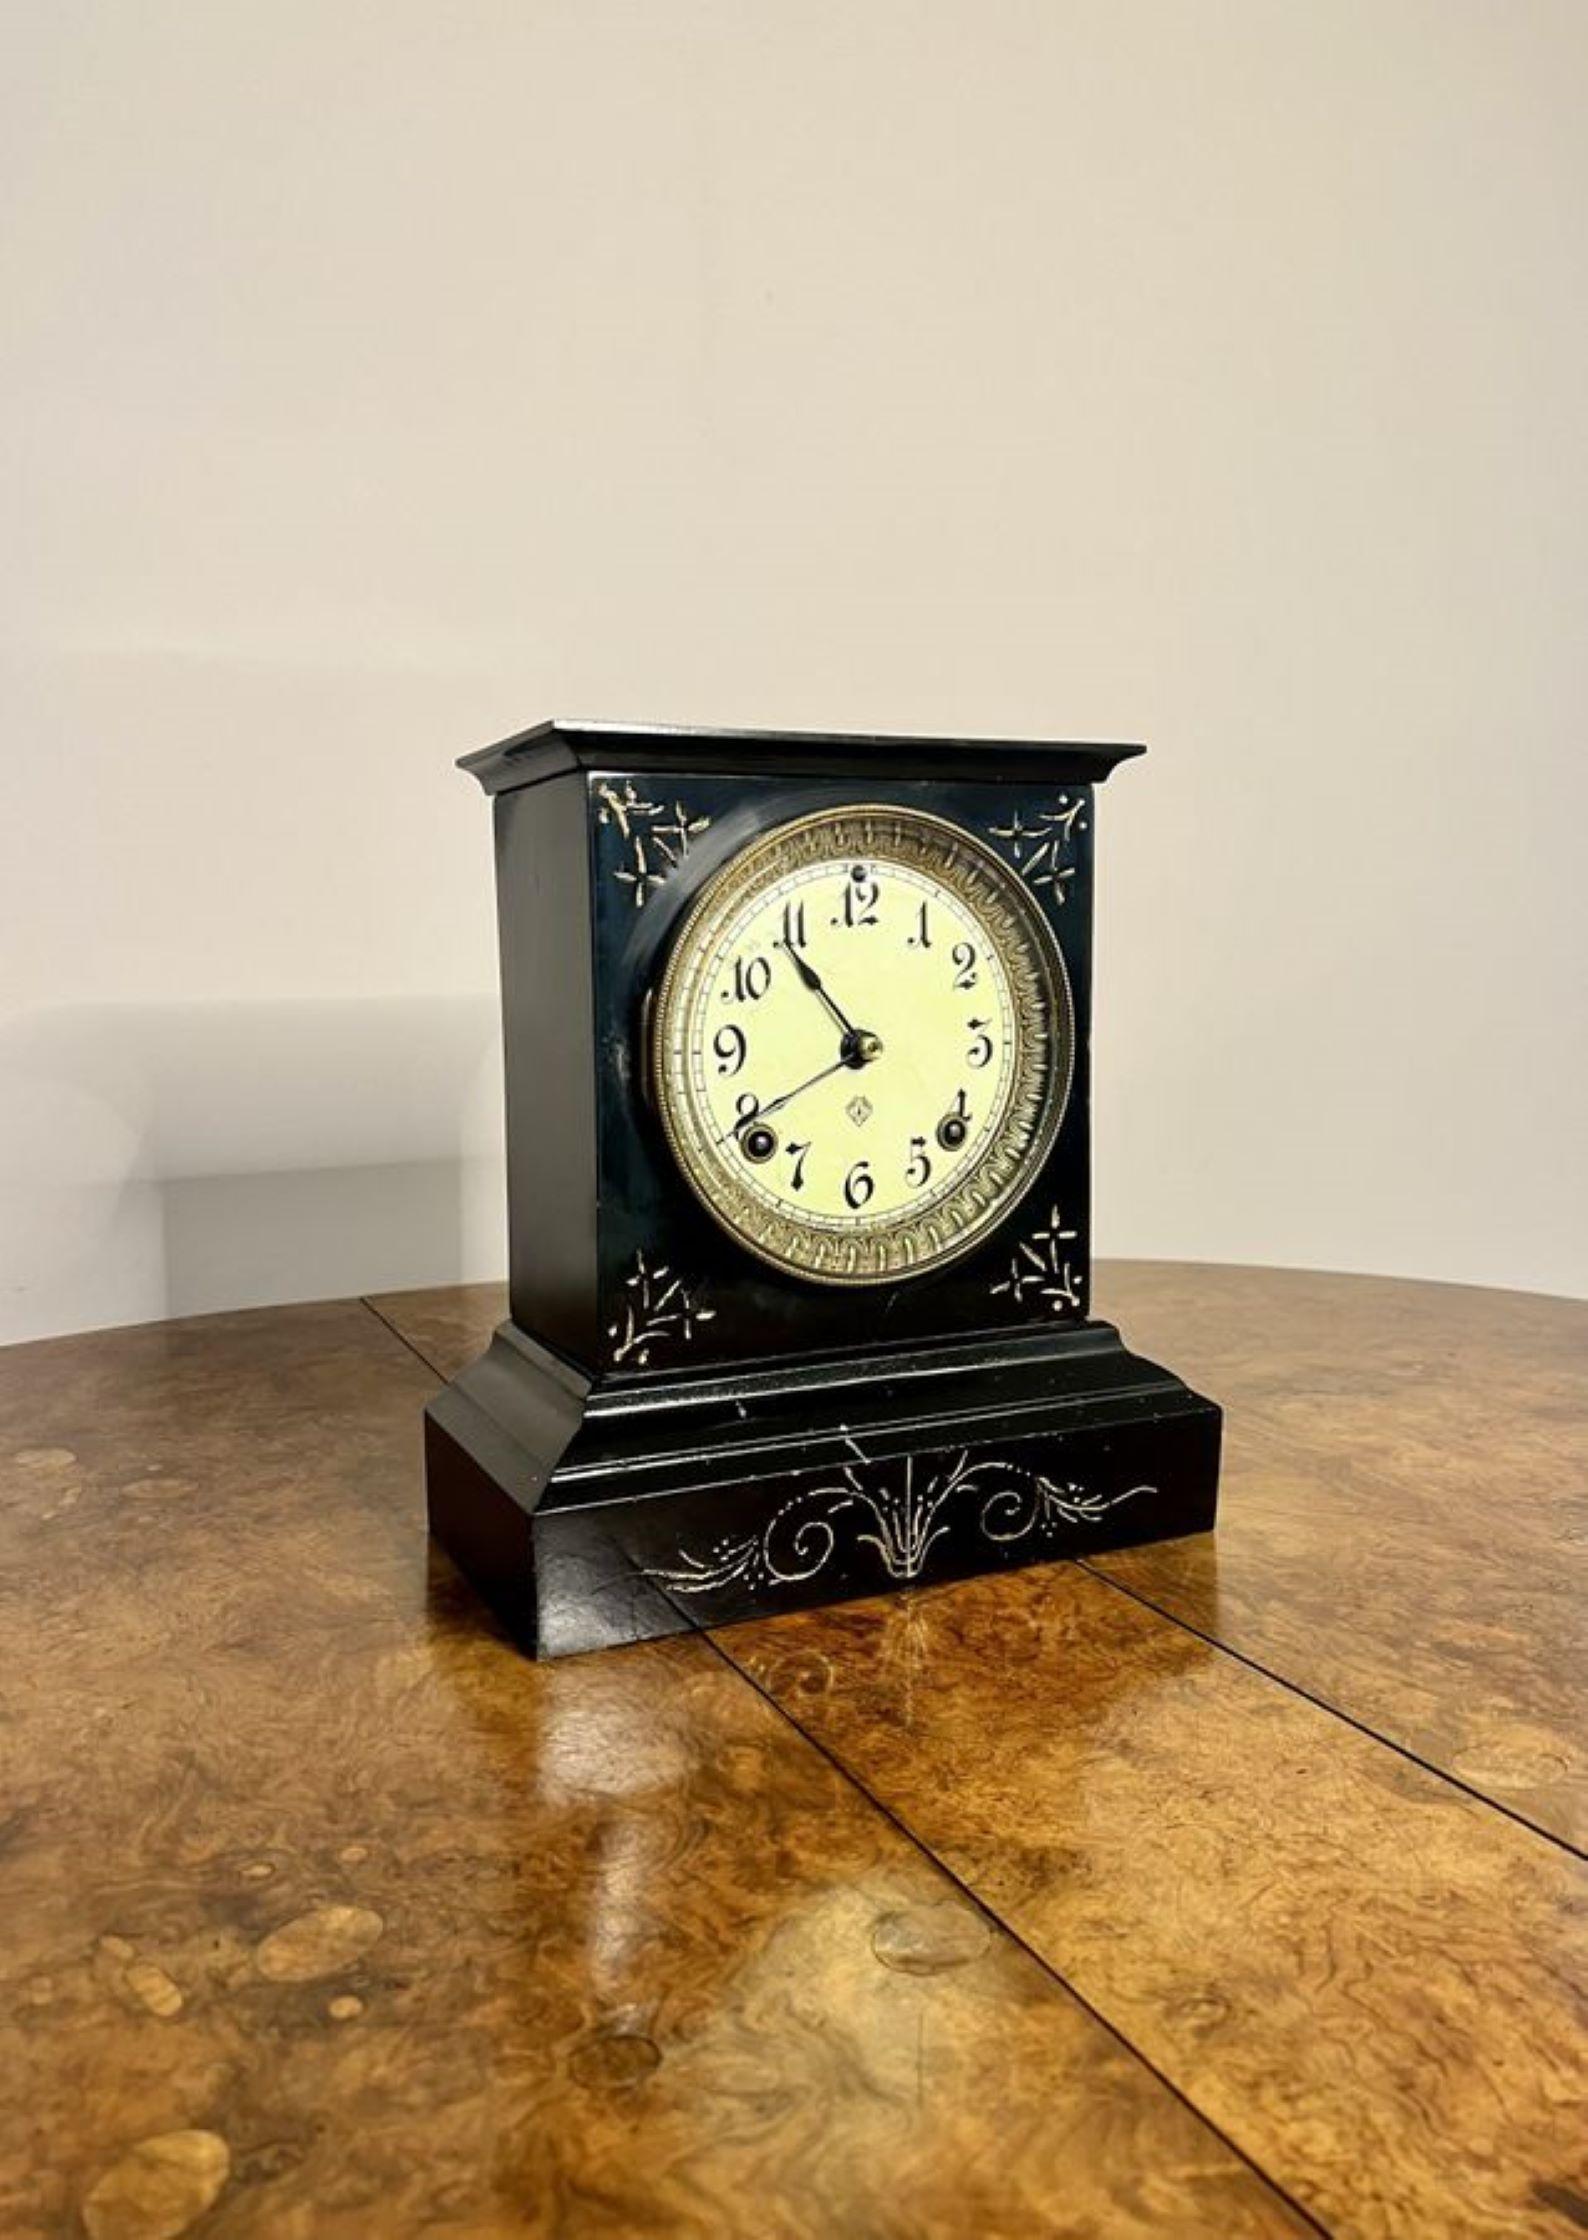 Lovely antique Victorian mantle clock by The Ansonia Clock Company of New York, having a signed white enamel Arabic dial with the original hands surrounded by a ornate brass bezel within a black case with gilt decoration having an eight day